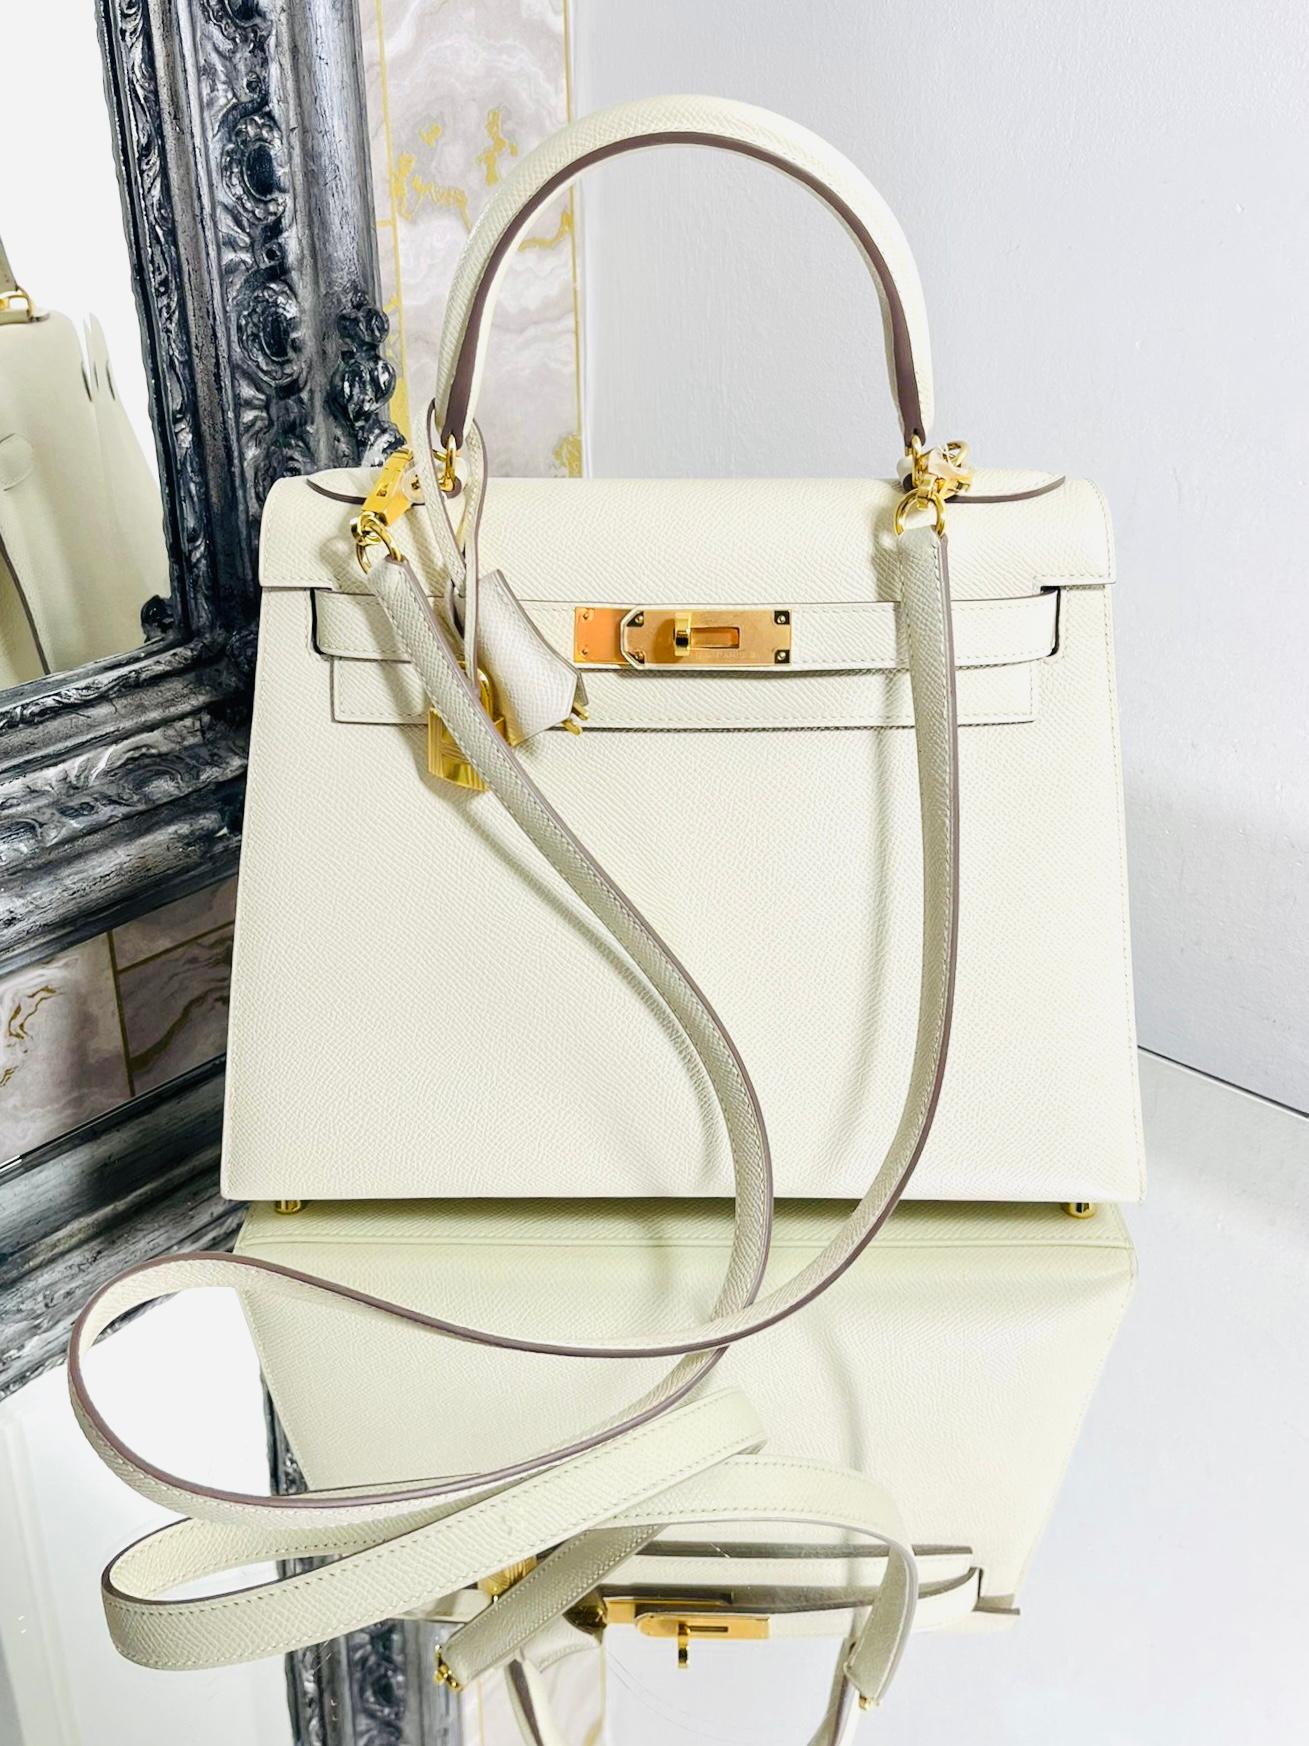 Hermes Kelly Sellier 28cm

Epsom leather, in off white, official Hermes colour is Craie with gold hardware.

Interior is lined in a tonal chèvre leather

From the year 2022

Size - Height 22cm, Width 28cm, Depth 11cm

Condition - Excellent ( most of